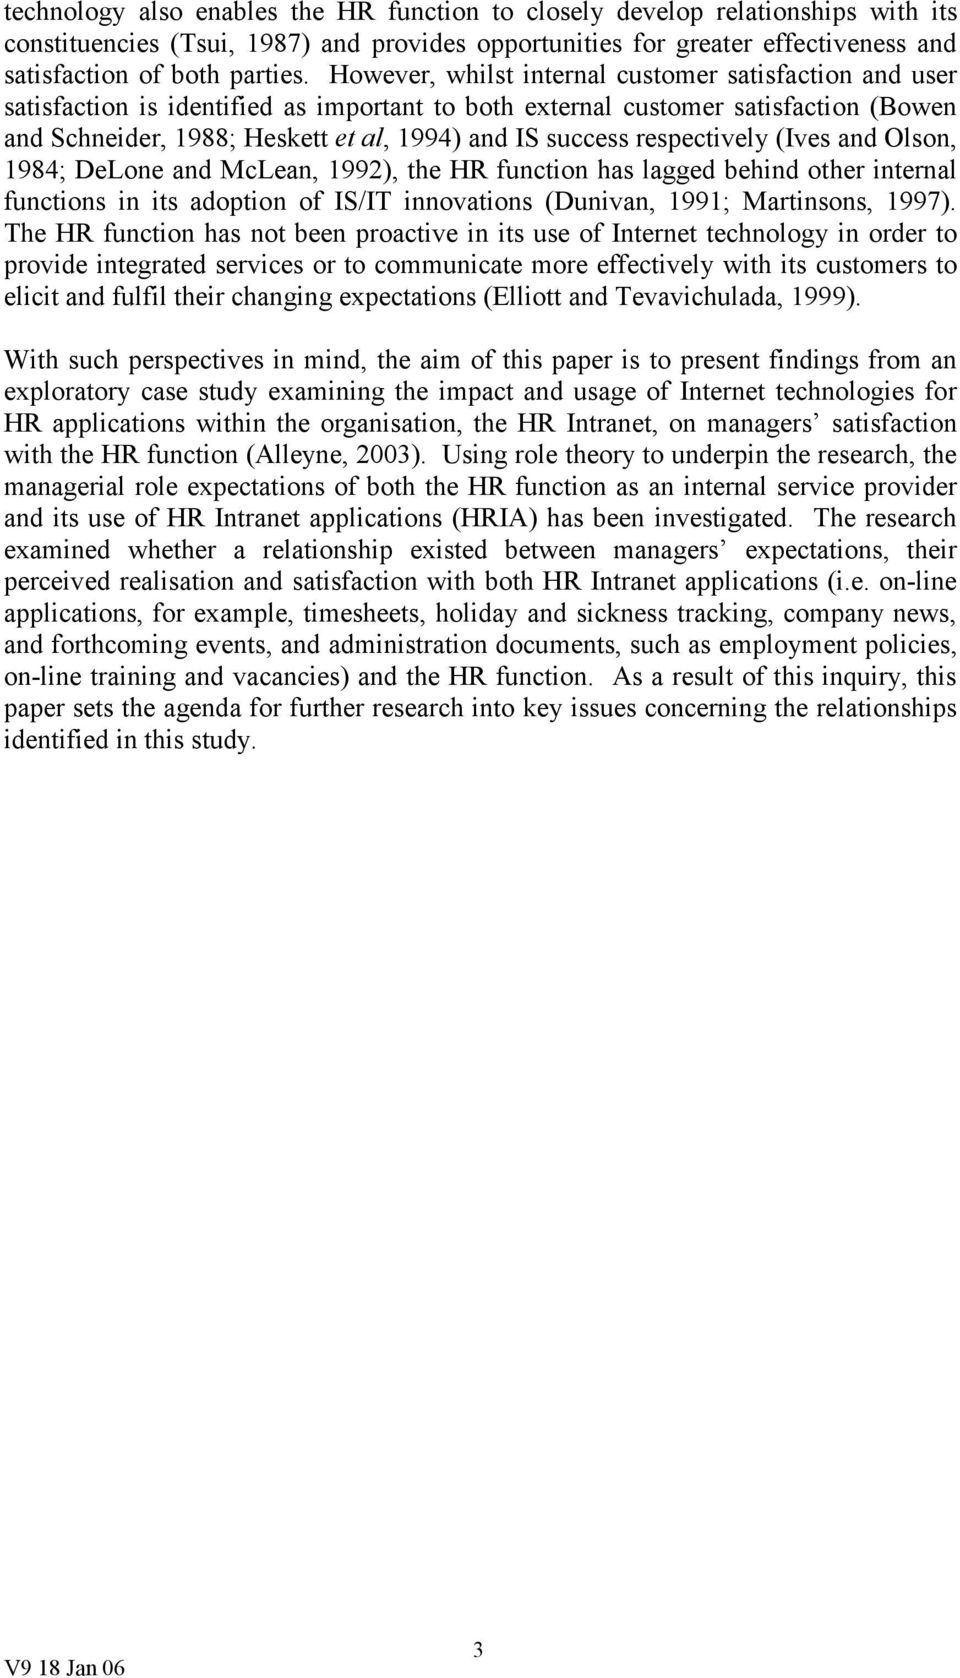 respectively (Ives and Olson, 1984; DeLone and McLean, 1992), the HR function has lagged behind other internal functions in its adoption of IS/IT innovations (Dunivan, 1991; Martinsons, 1997).